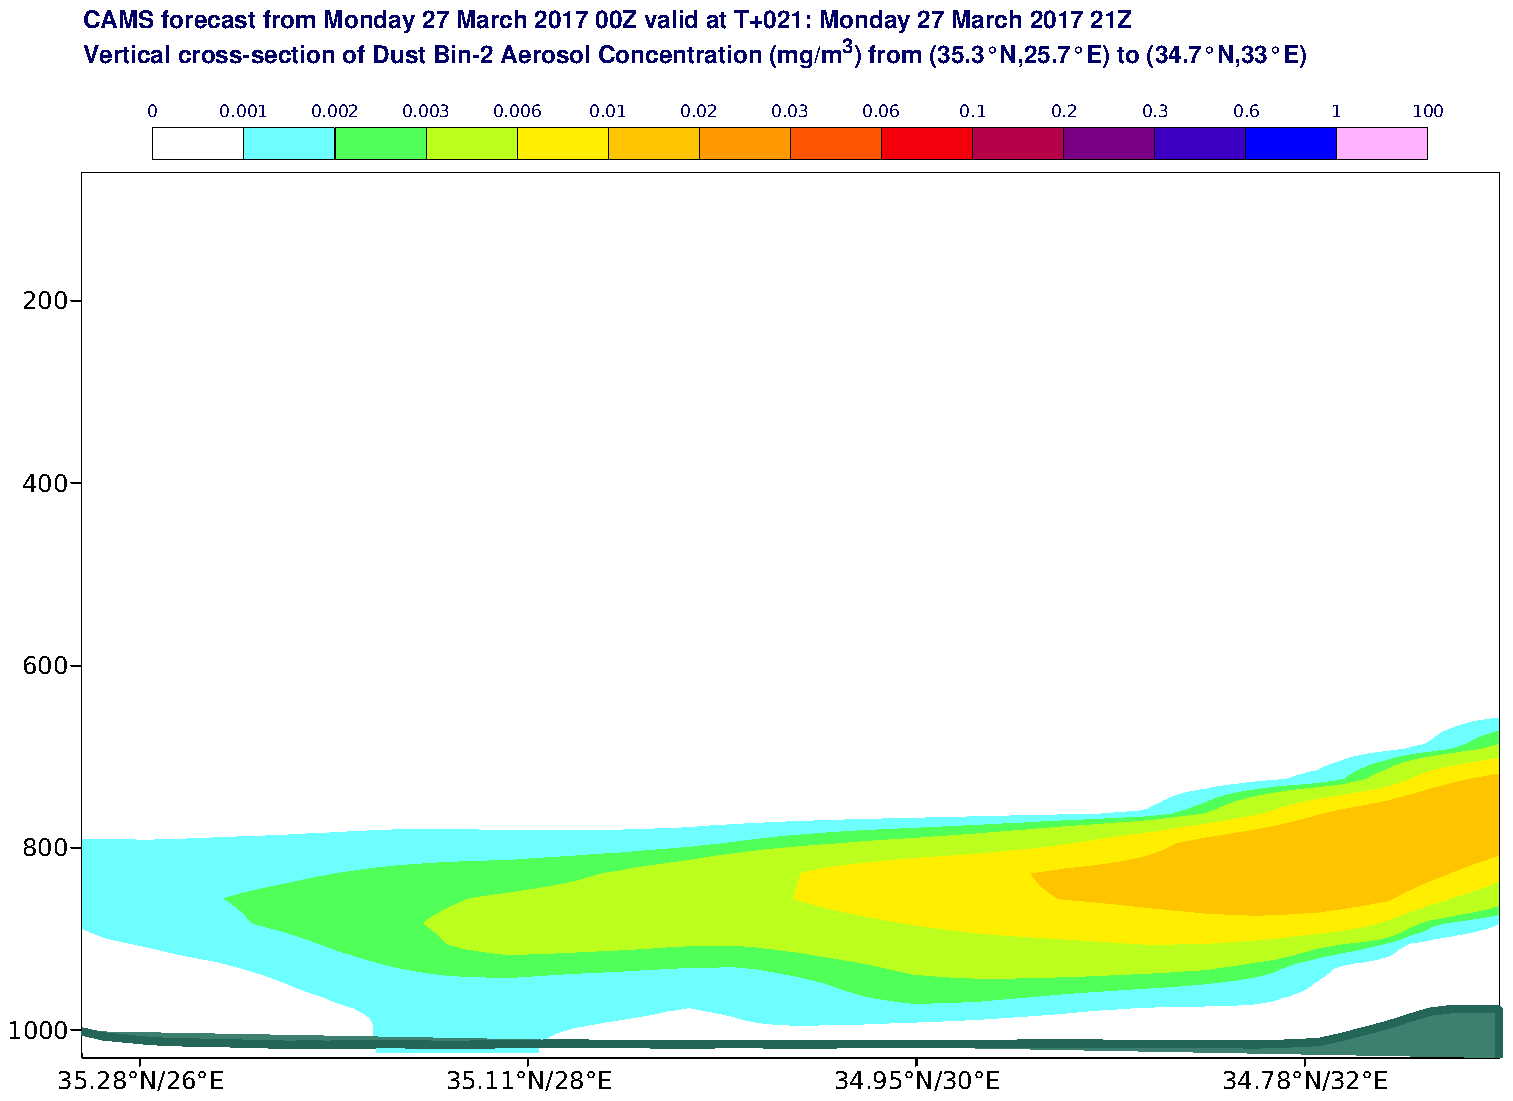 Vertical cross-section of Dust Bin-2 Aerosol Concentration (mg/m3) valid at T21 - 2017-03-27 21:00